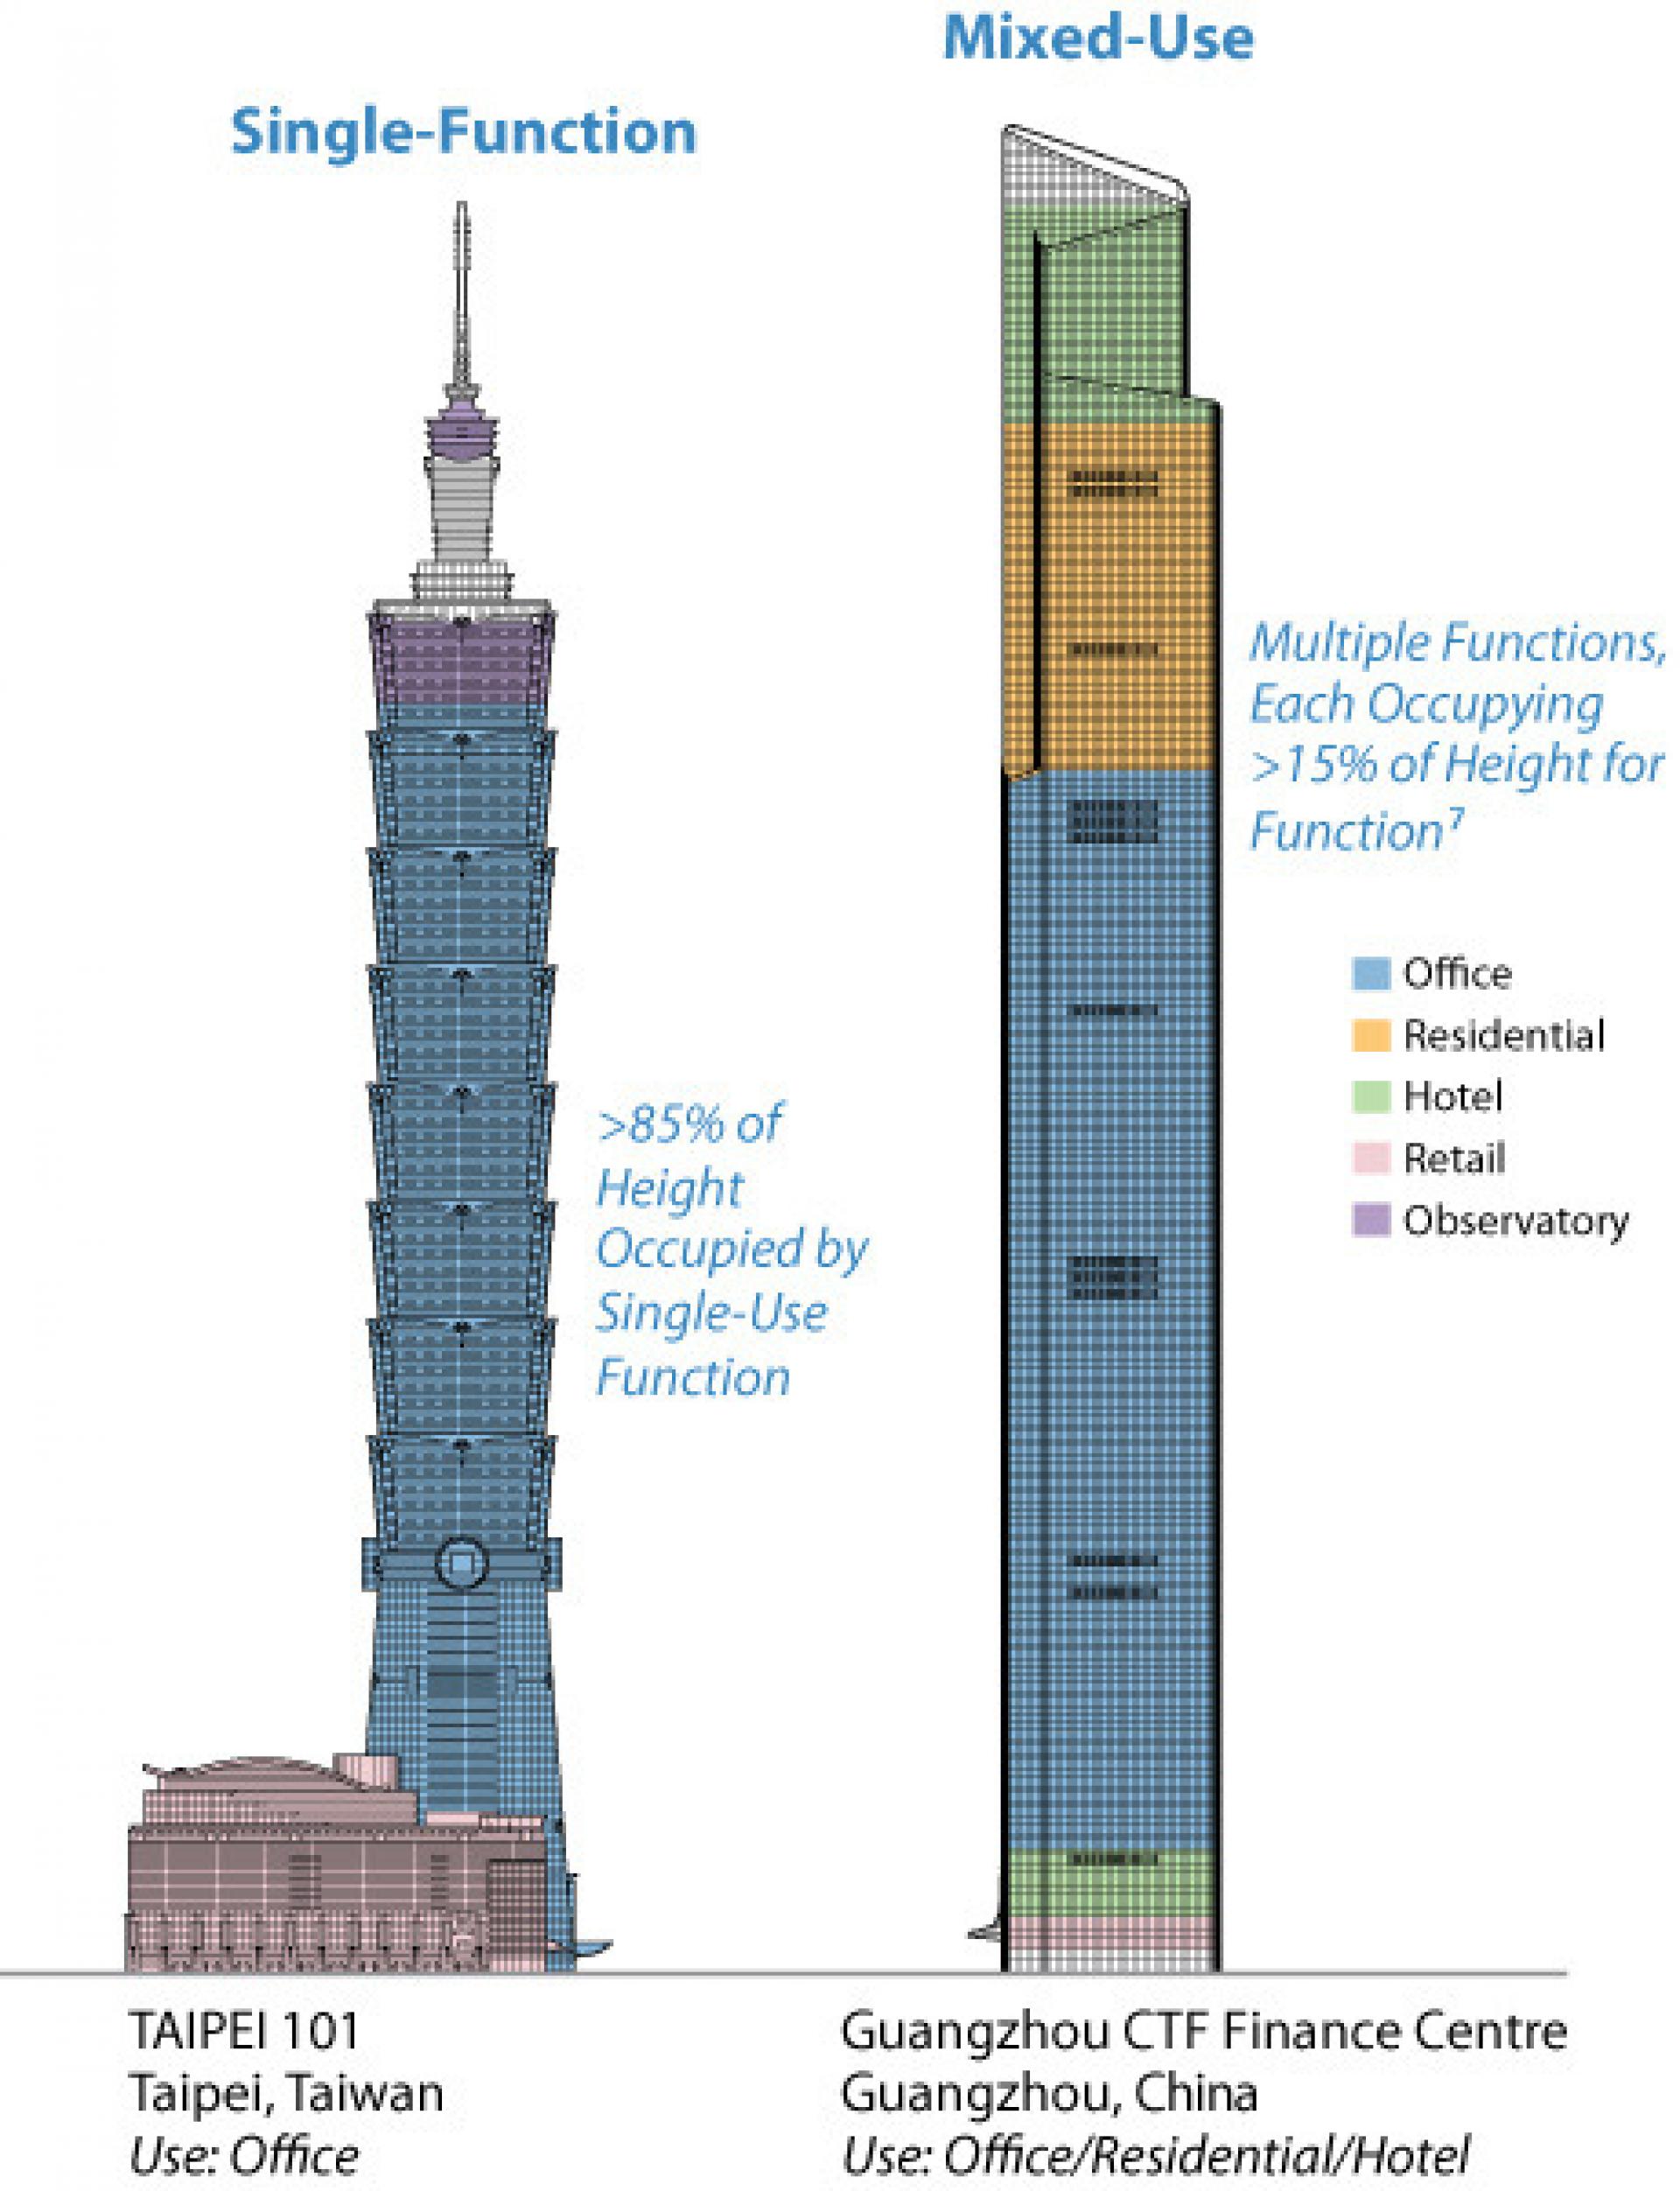 Single-function vs. Mixed-use Buildings. | Source CTBUH